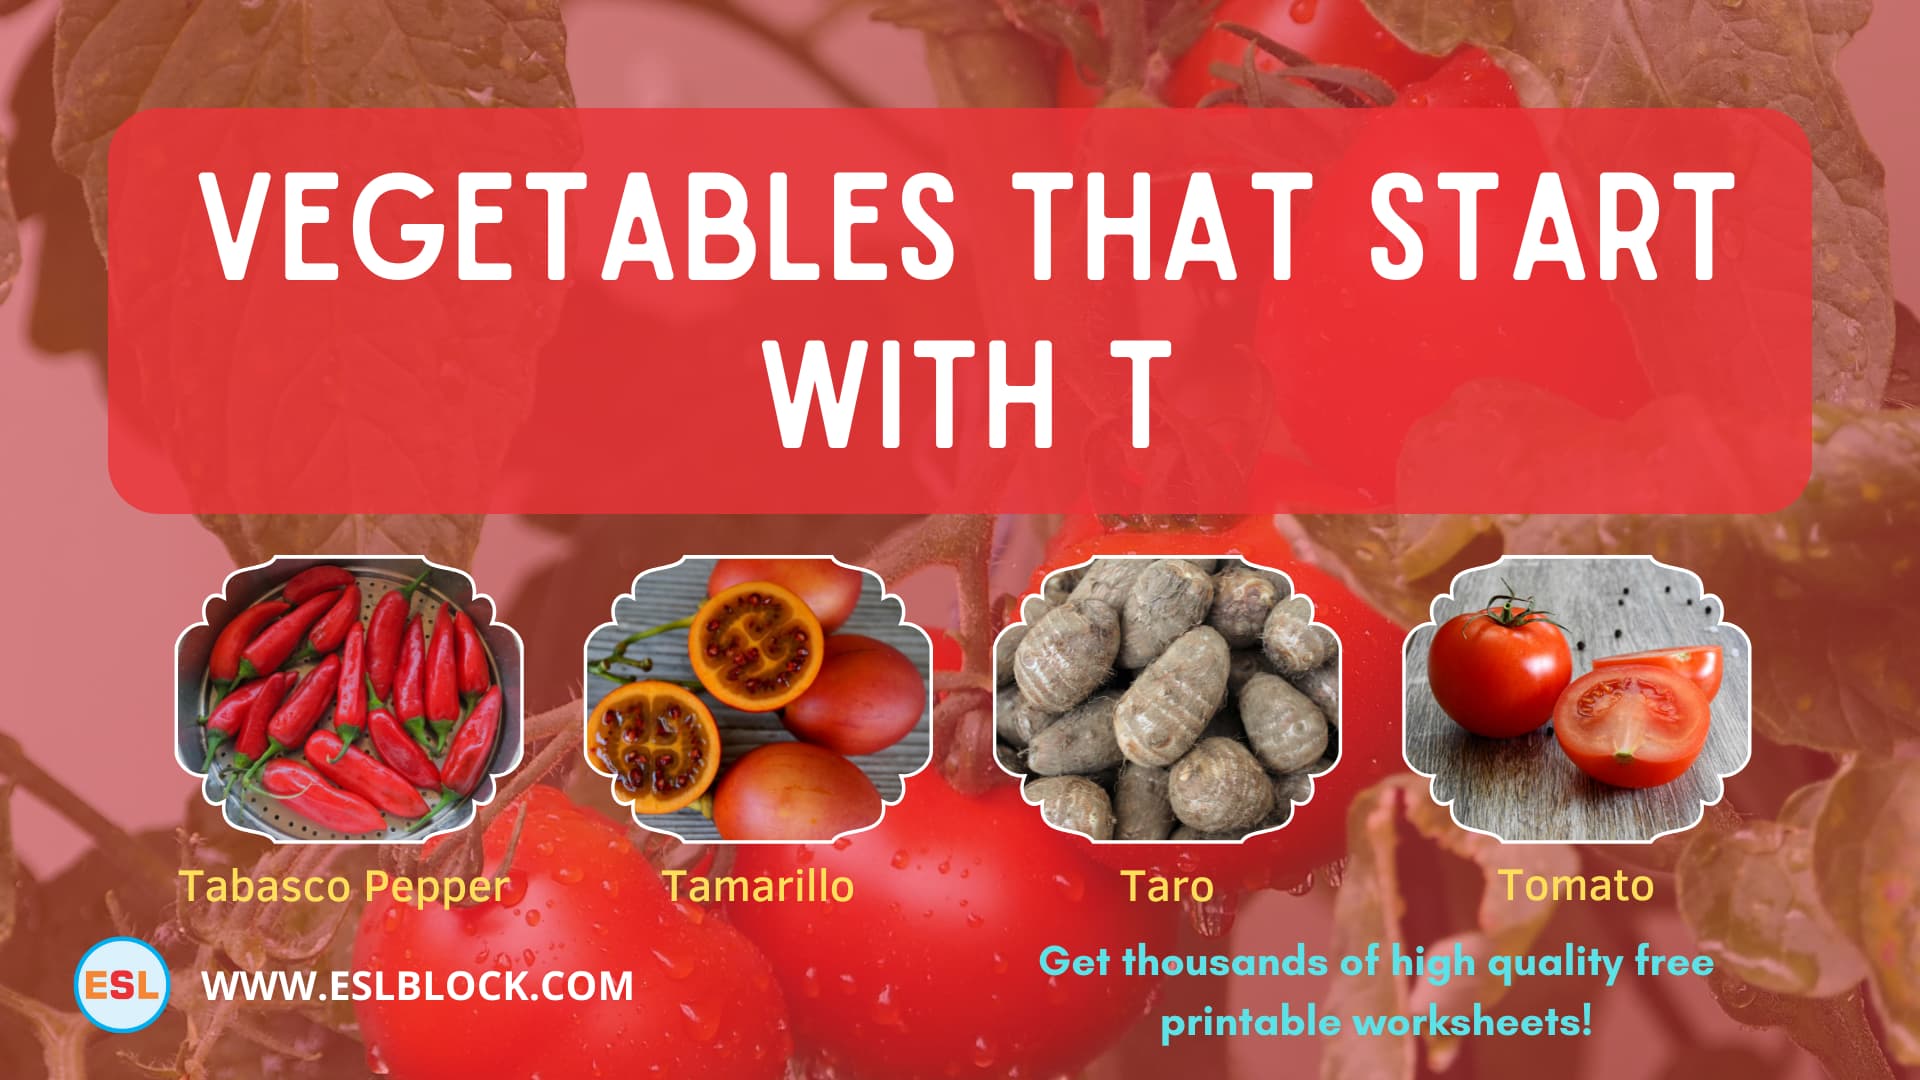 5 Letter Vegetables Starting With T, English, English Nouns, English Vocabulary, English Words, List of Vegetables That Start With T, Nouns, T Vegetables, T Vegetables in English, T Vegetables Names, Vegetables List, Vegetables Names, Vegetables That Begins With T, Vegetables That Start With T, Vocabulary